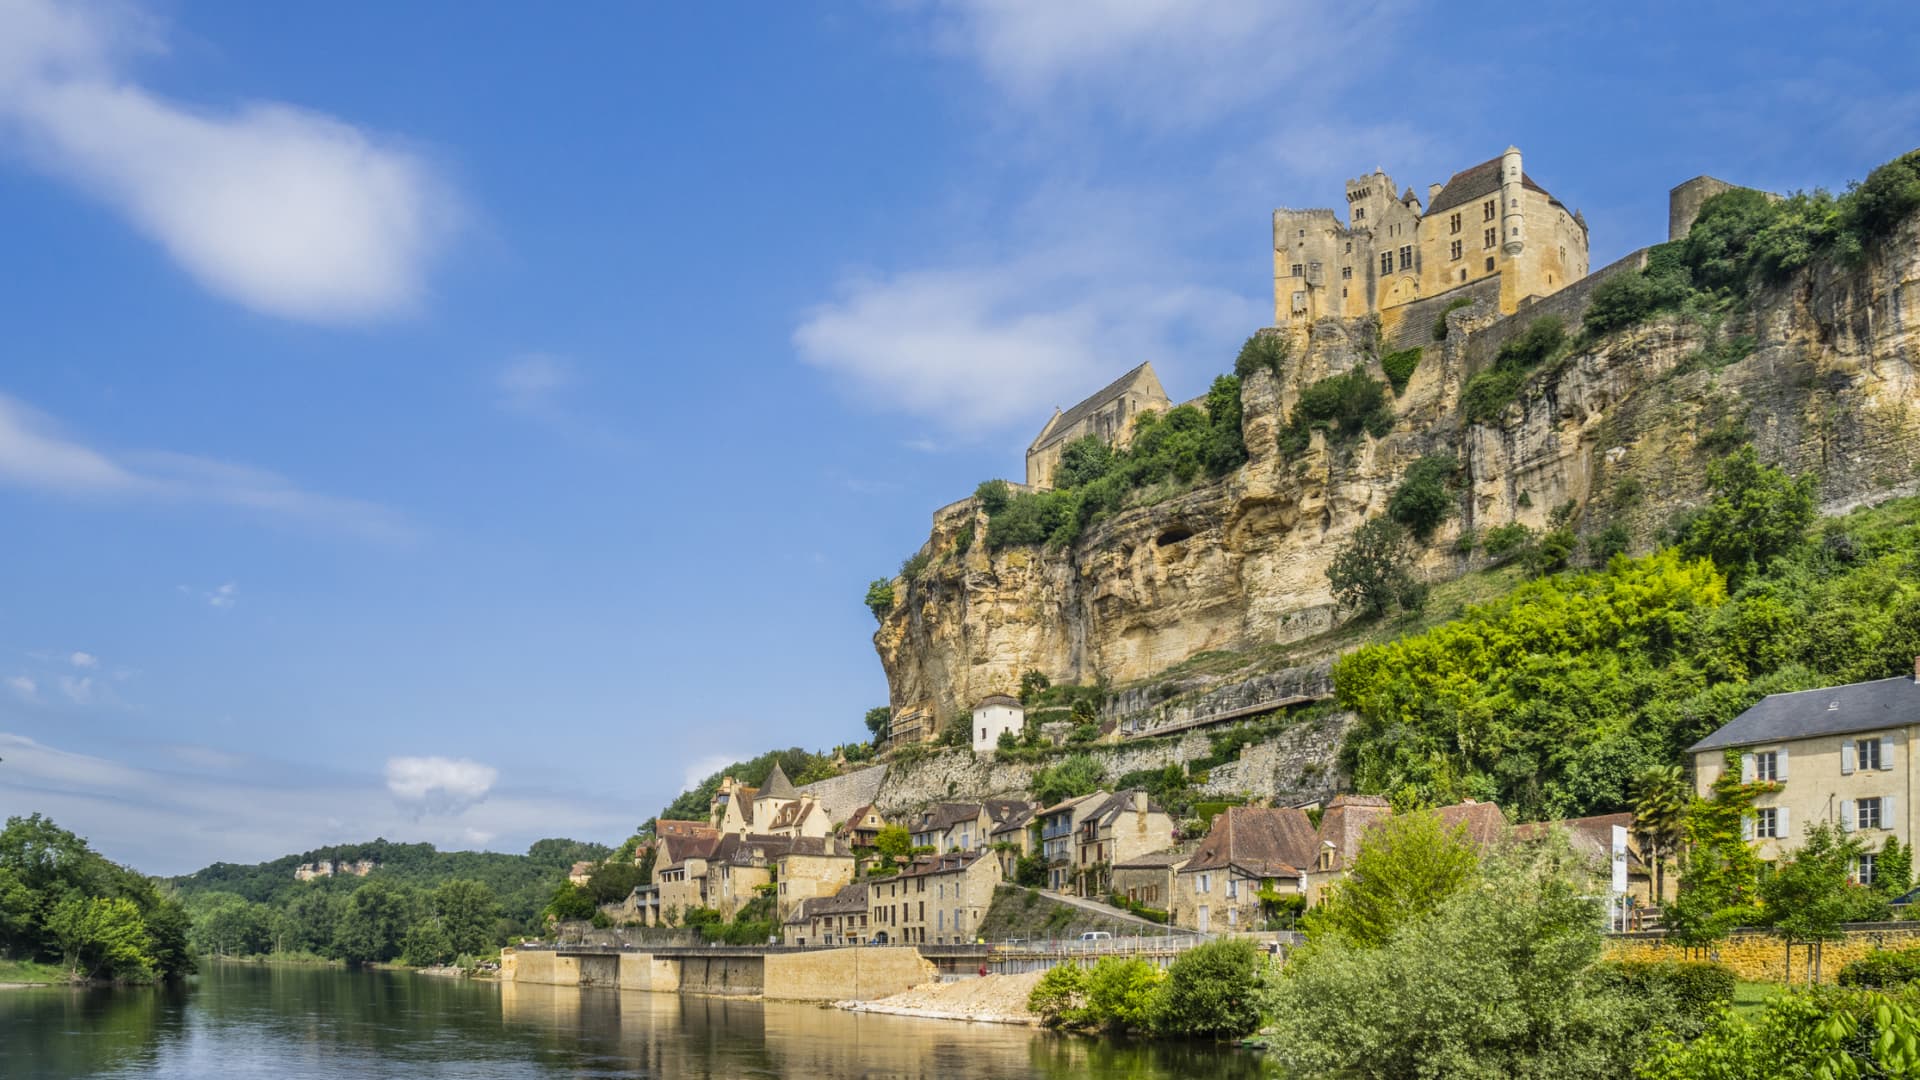 The medieval Chateau de Beynac overlooking the Dordogne River in France.